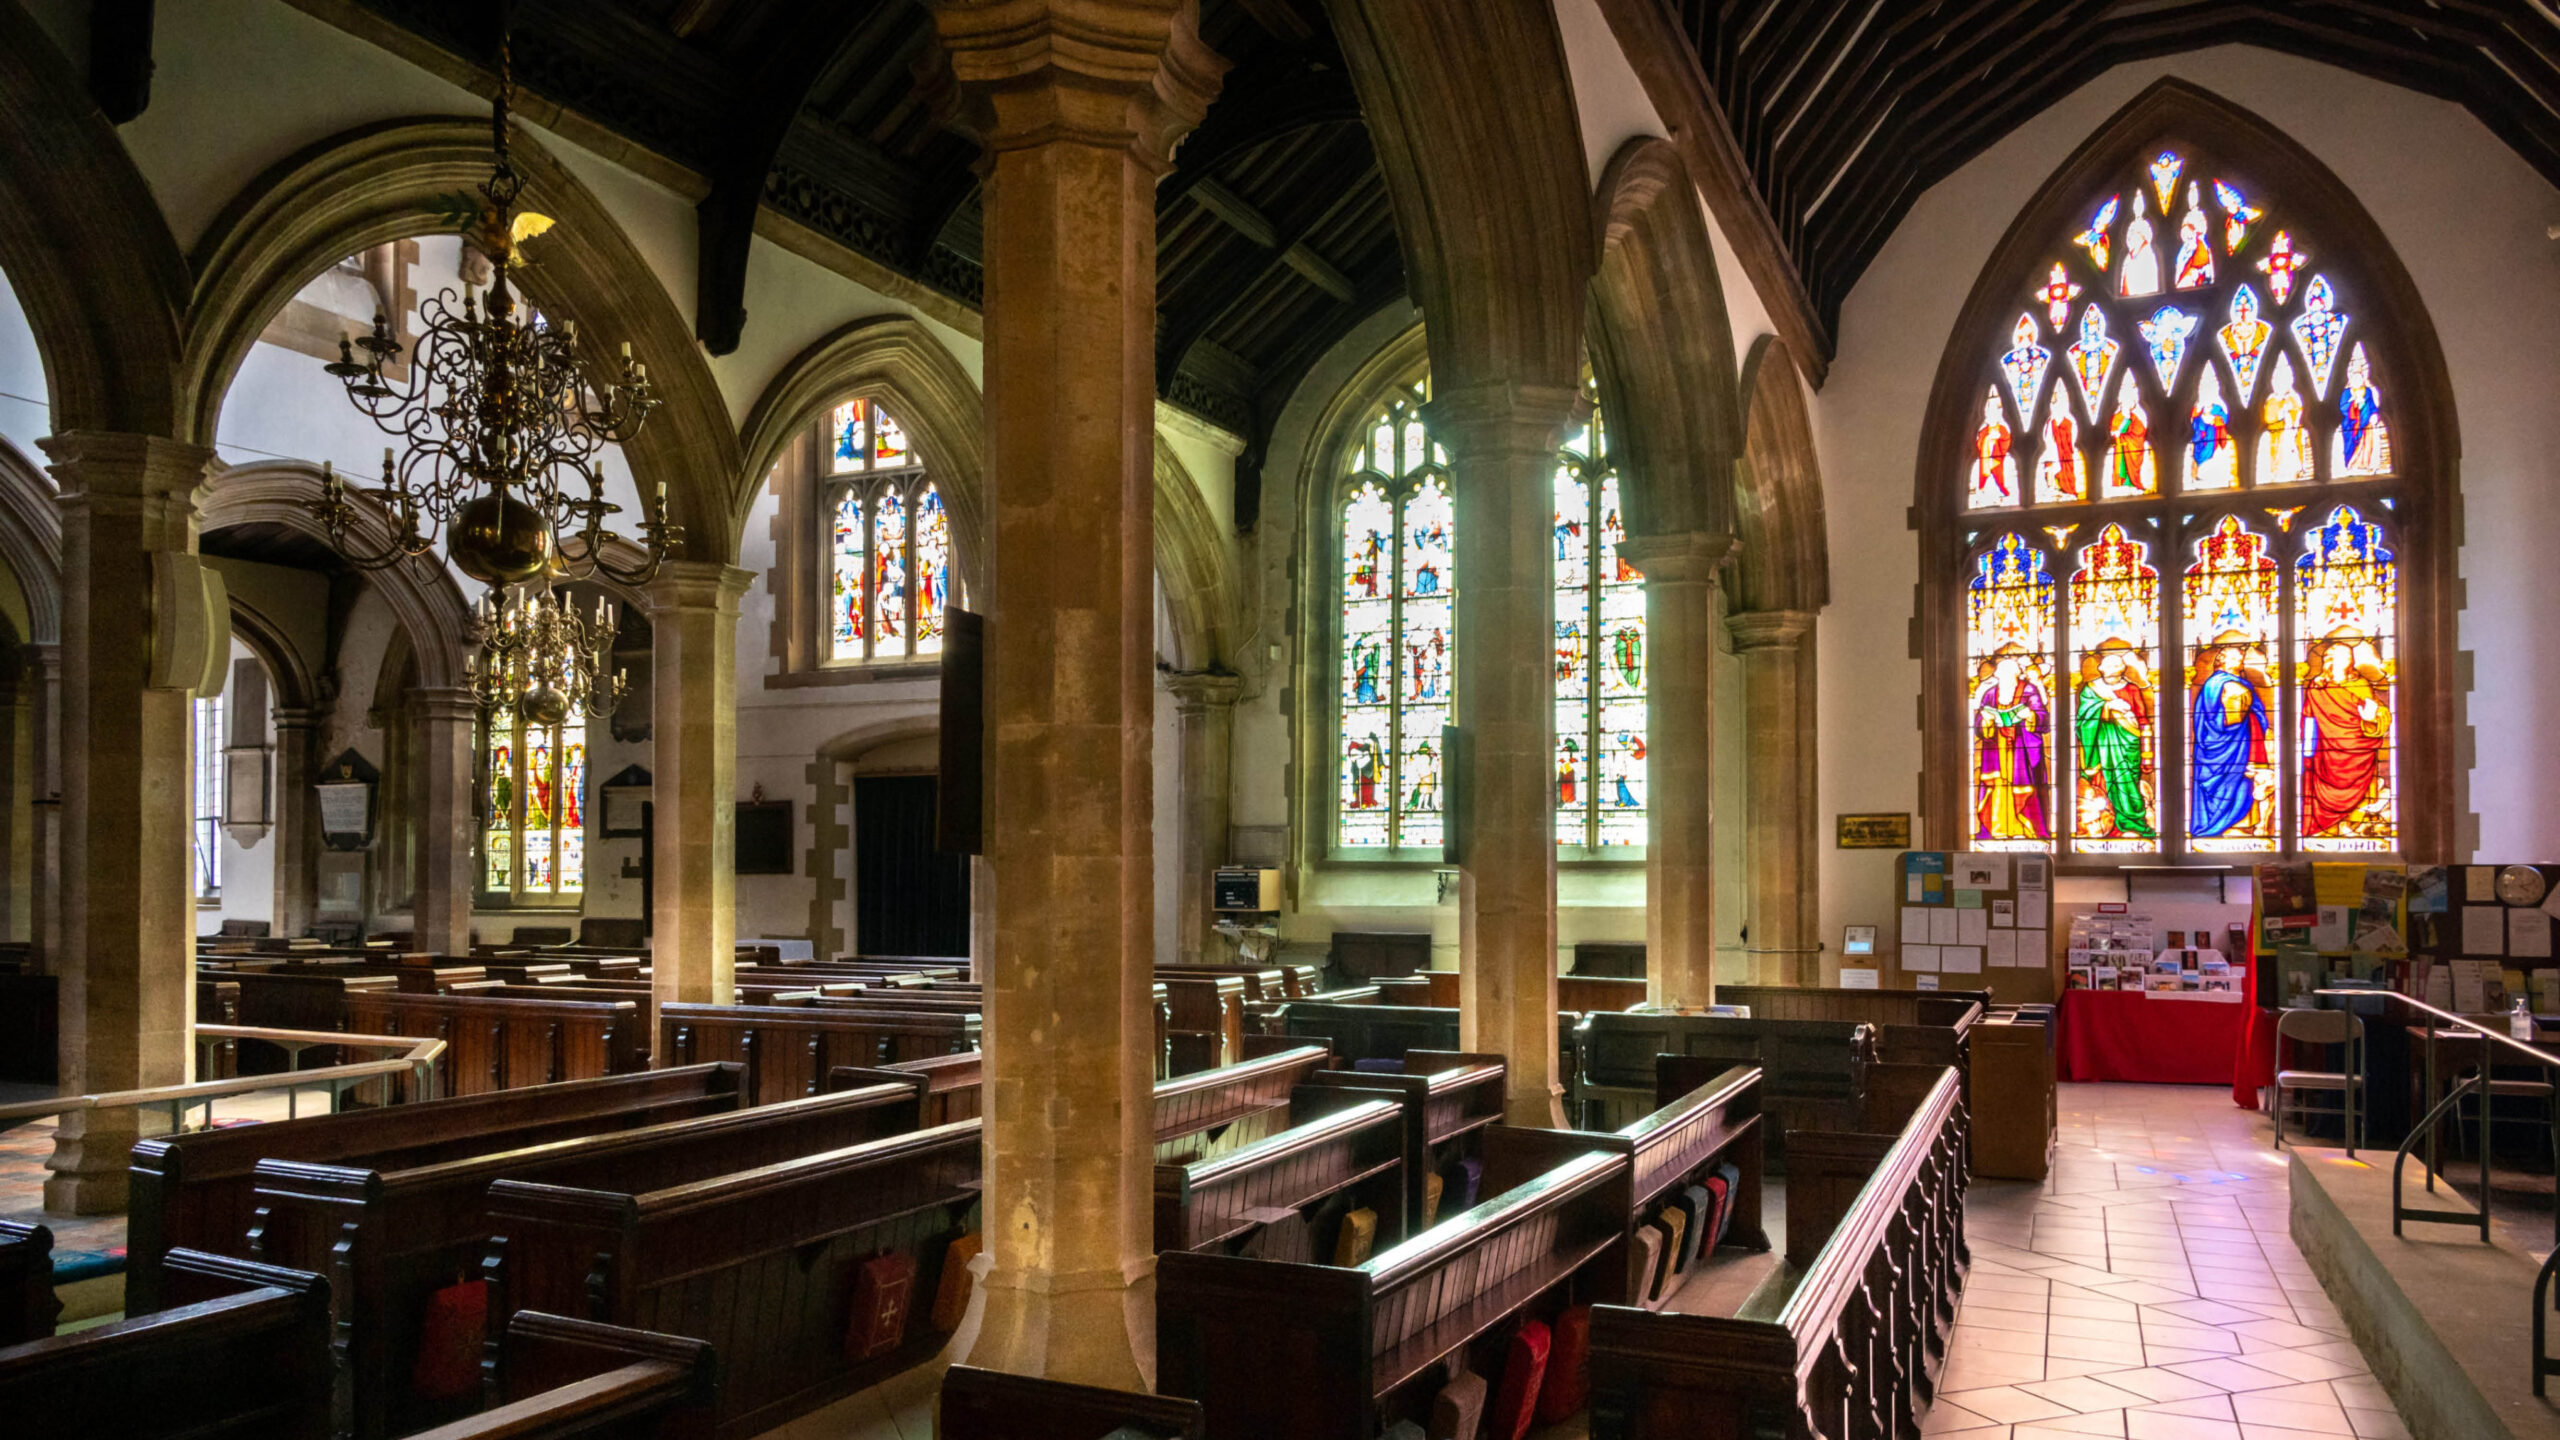 chapel pews with stained glass windows and pillars